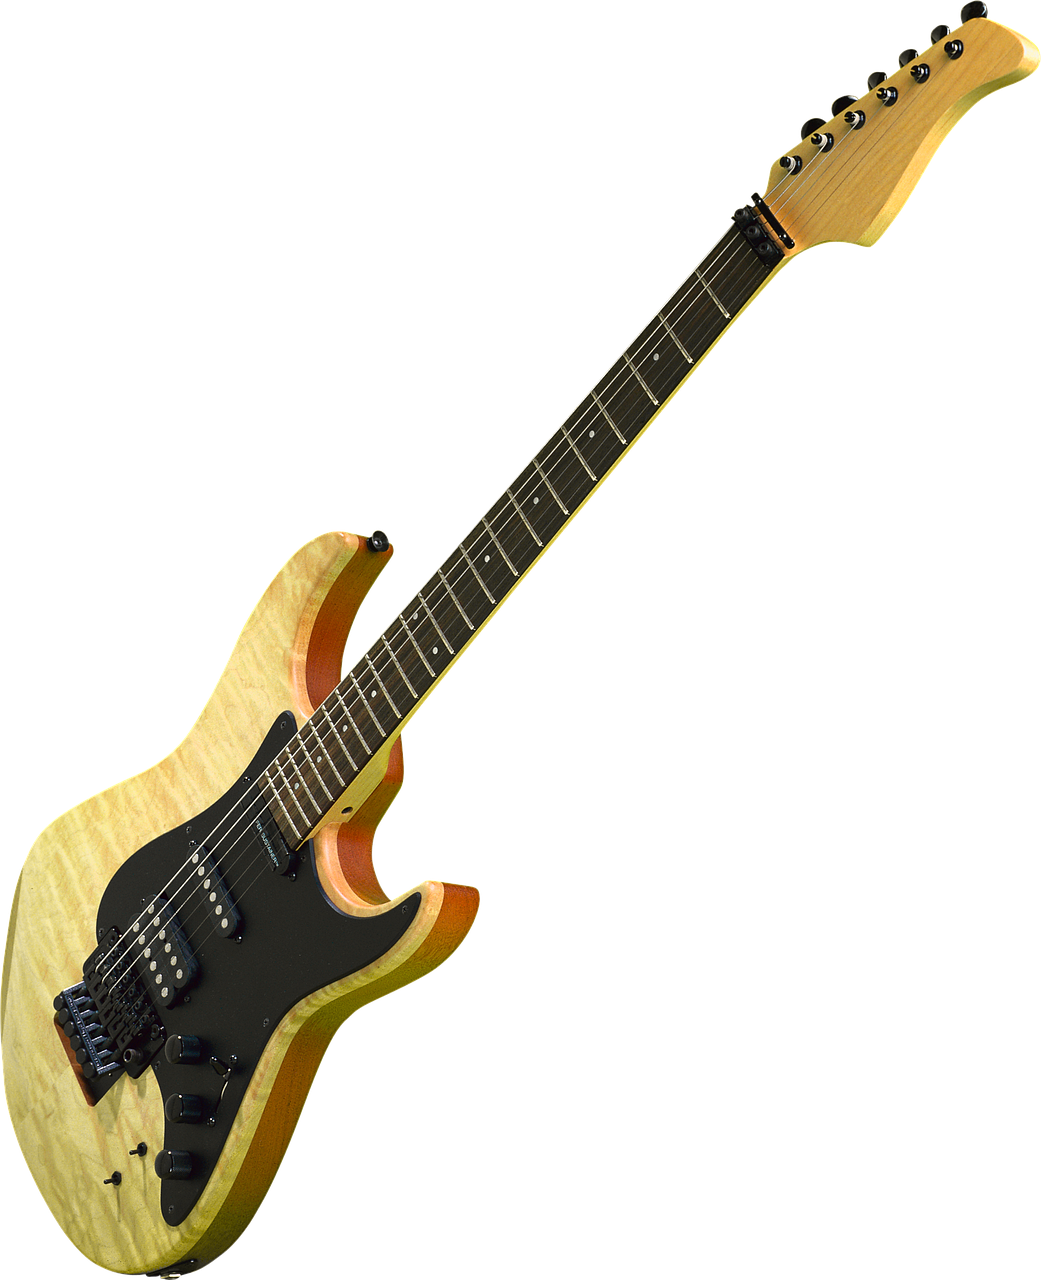 a close up of a guitar on a black background, a digital rendering, shin hanga, fully body photo, yellowed, japan grungerock from colors, electric guitar